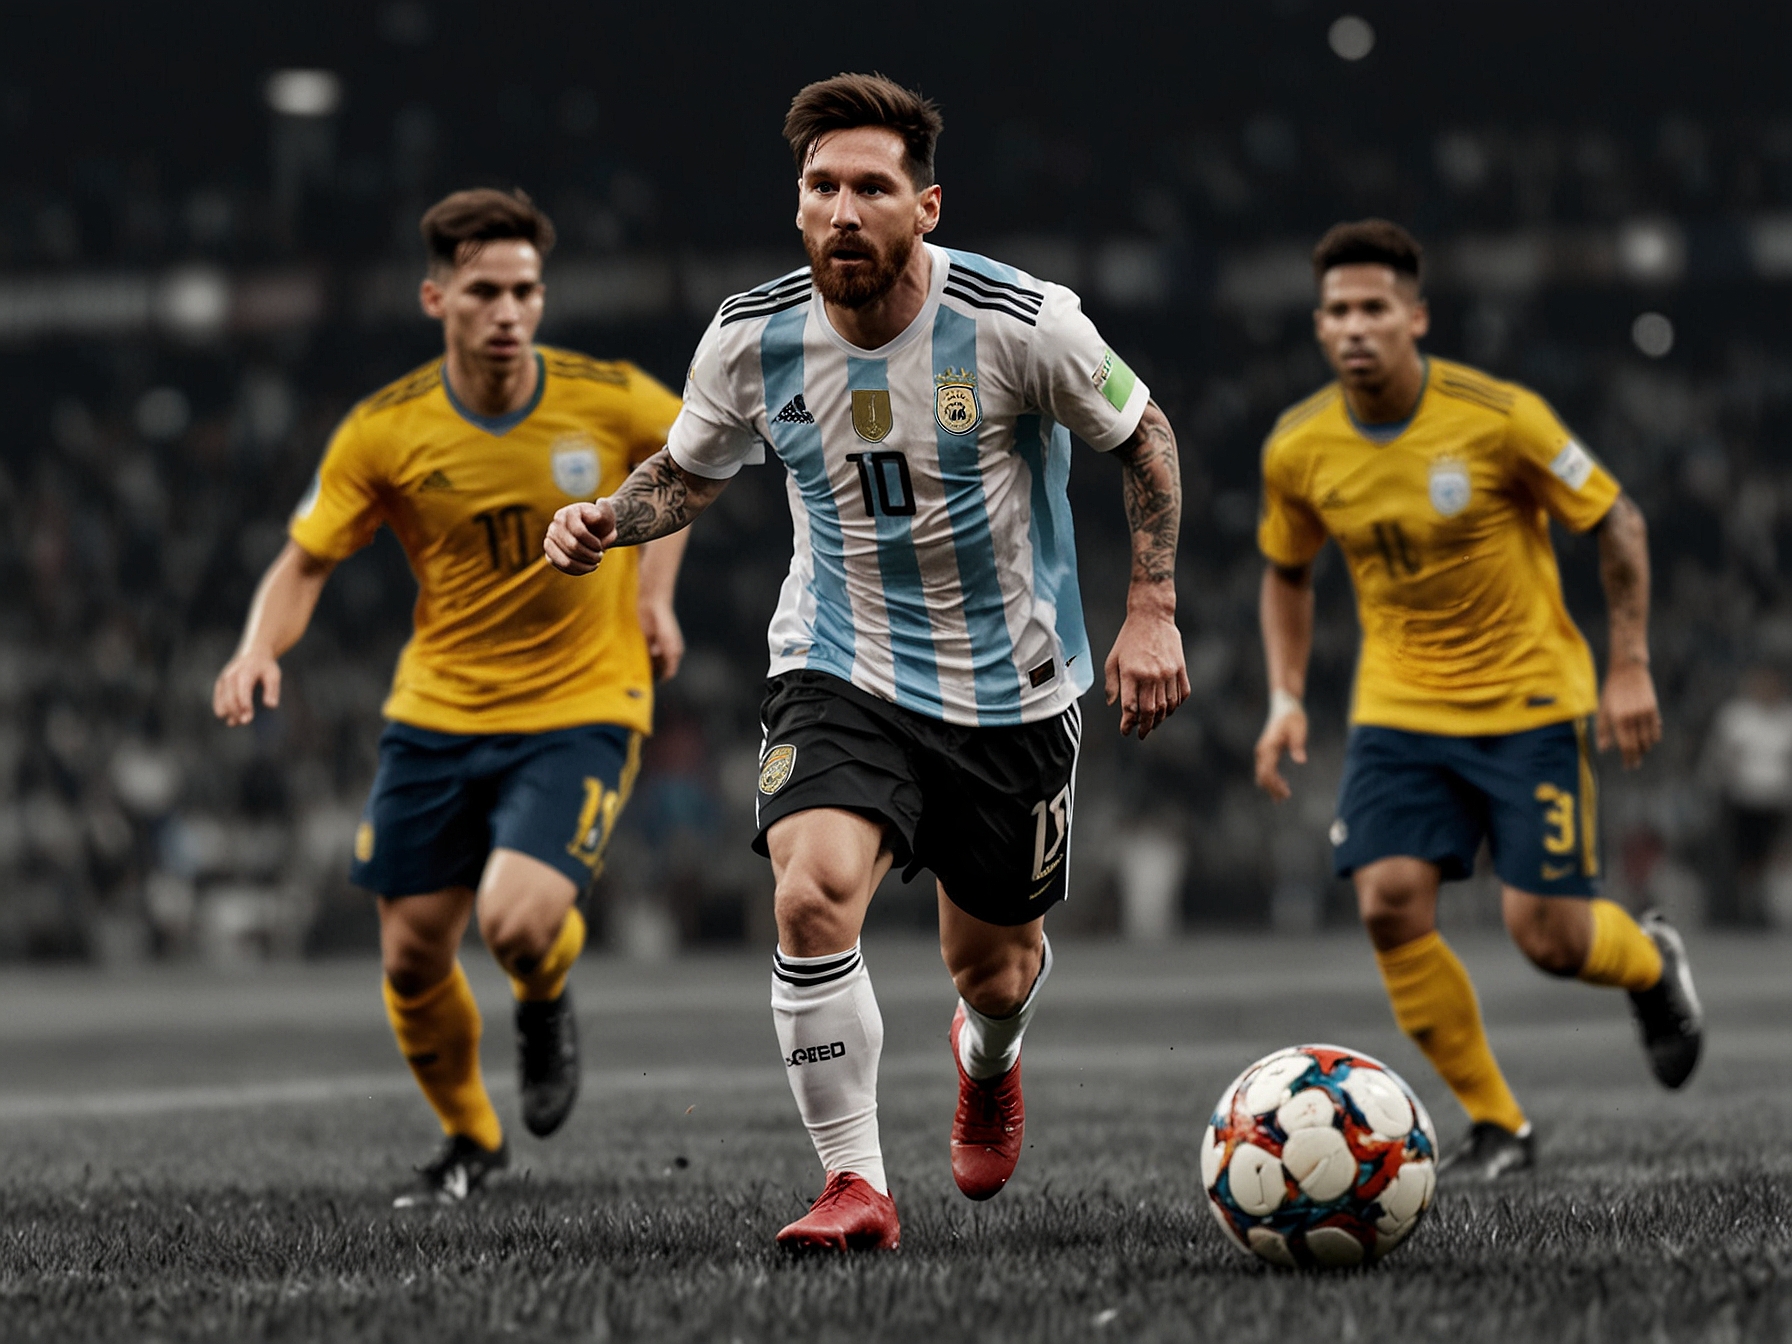 An illustration of Lionel Messi skillfully dribbling past defenders, showcasing his unparalleled talent and crucial role in Argentina's 2024 Copa America campaign.